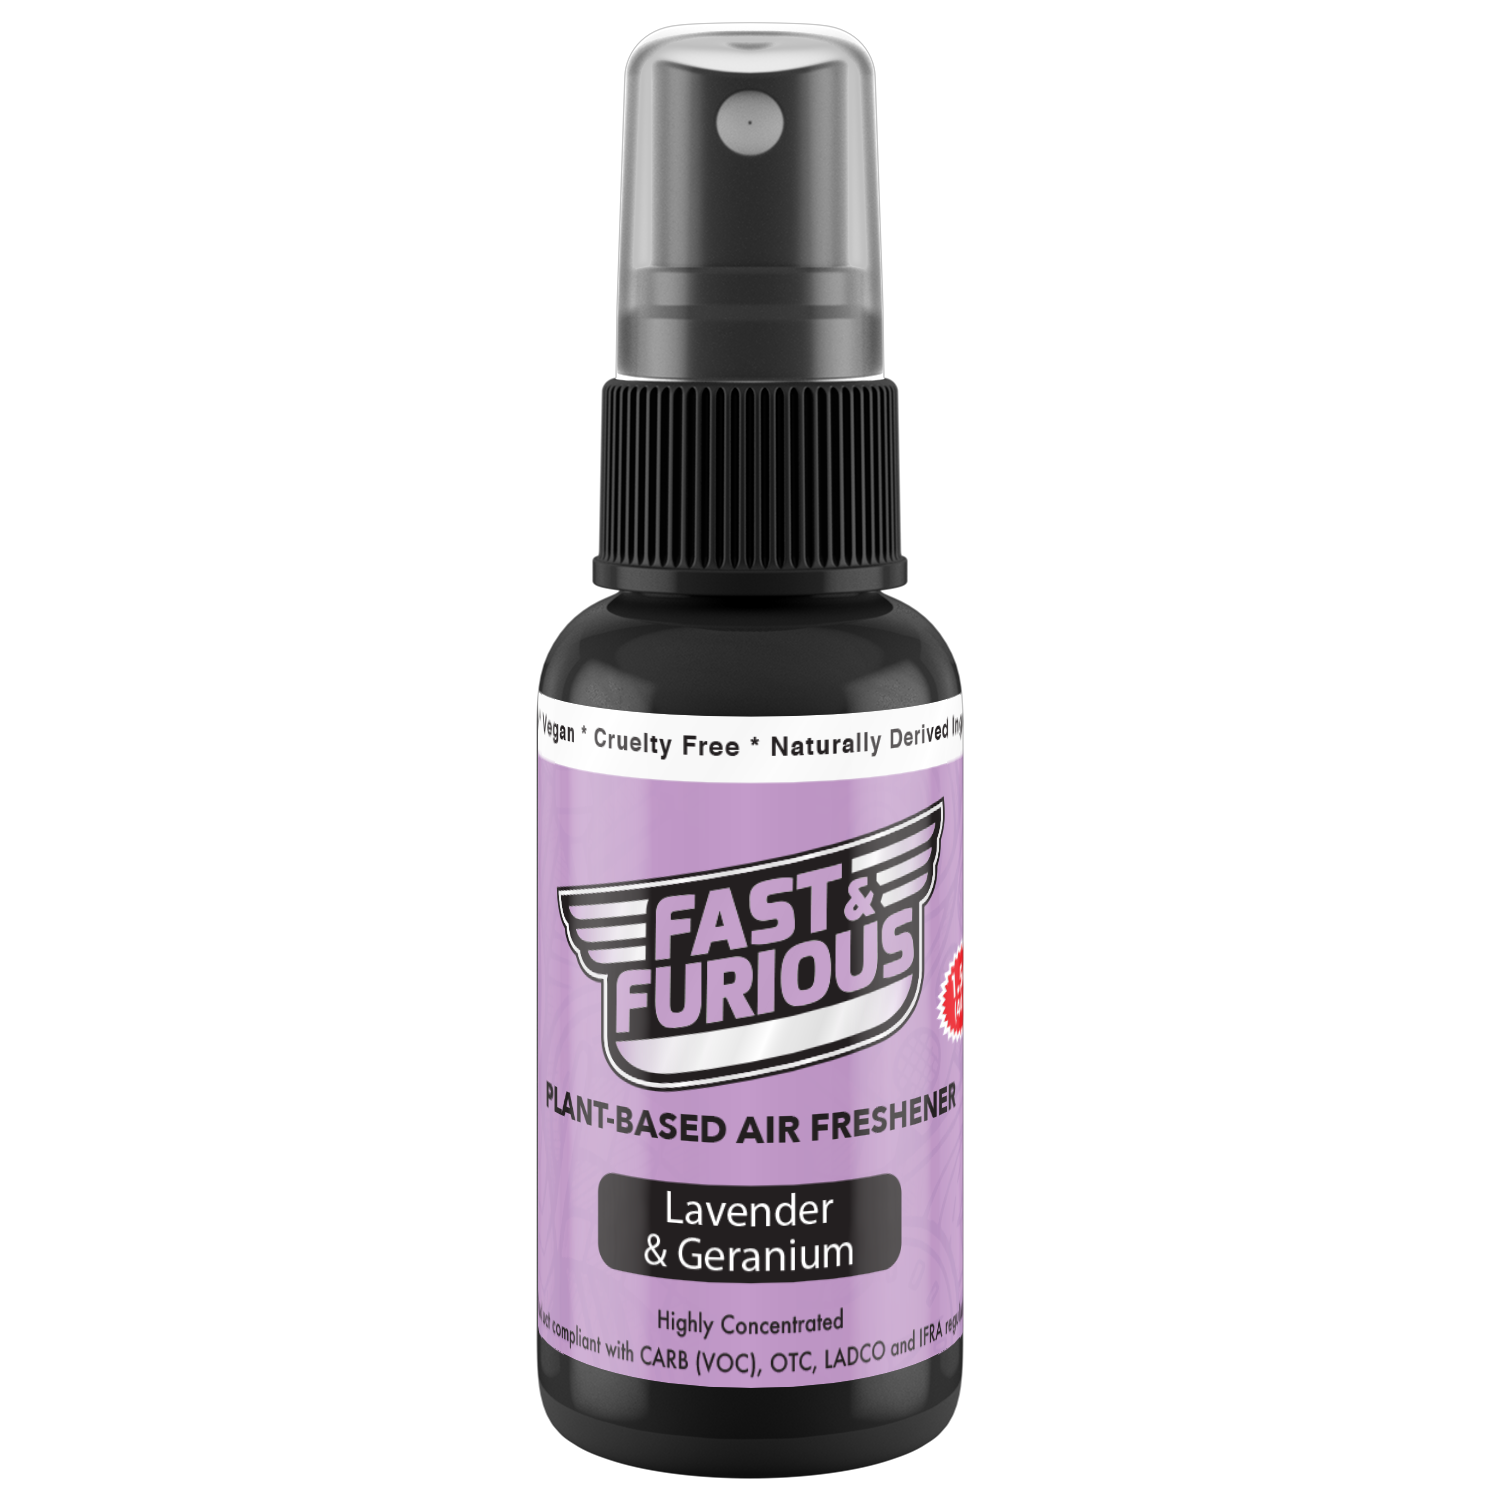 Fast and Furious Plant-Based Air Freshener - Lavender & Geranium Scent Size: 1.5oz